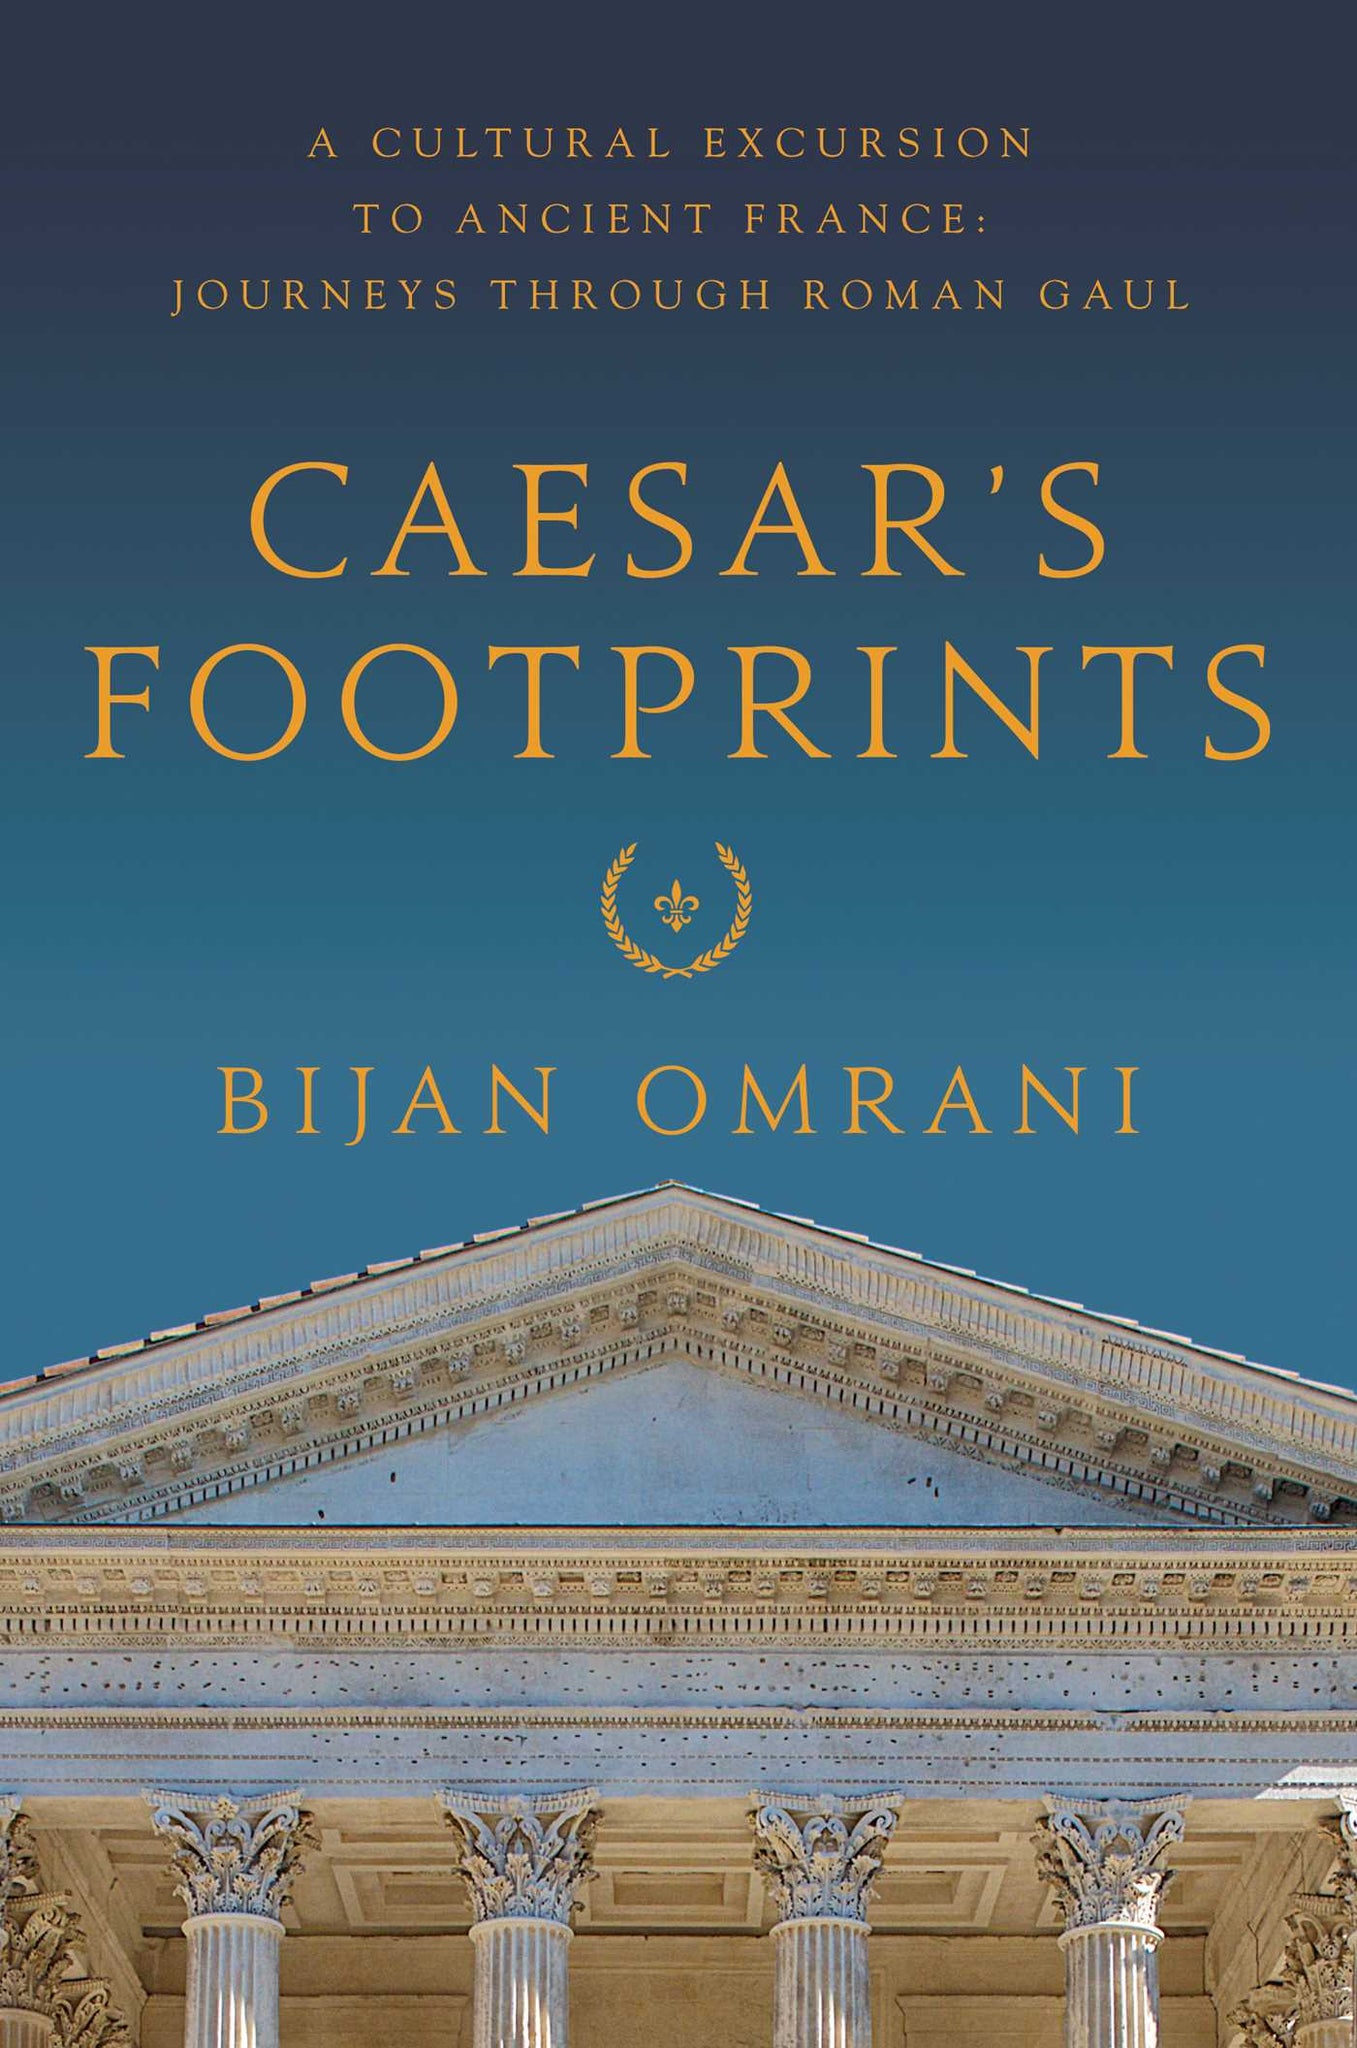 Caesar's Footprints : A Cultural Excursion to Ancient France: Journeys Through Roman Gaul